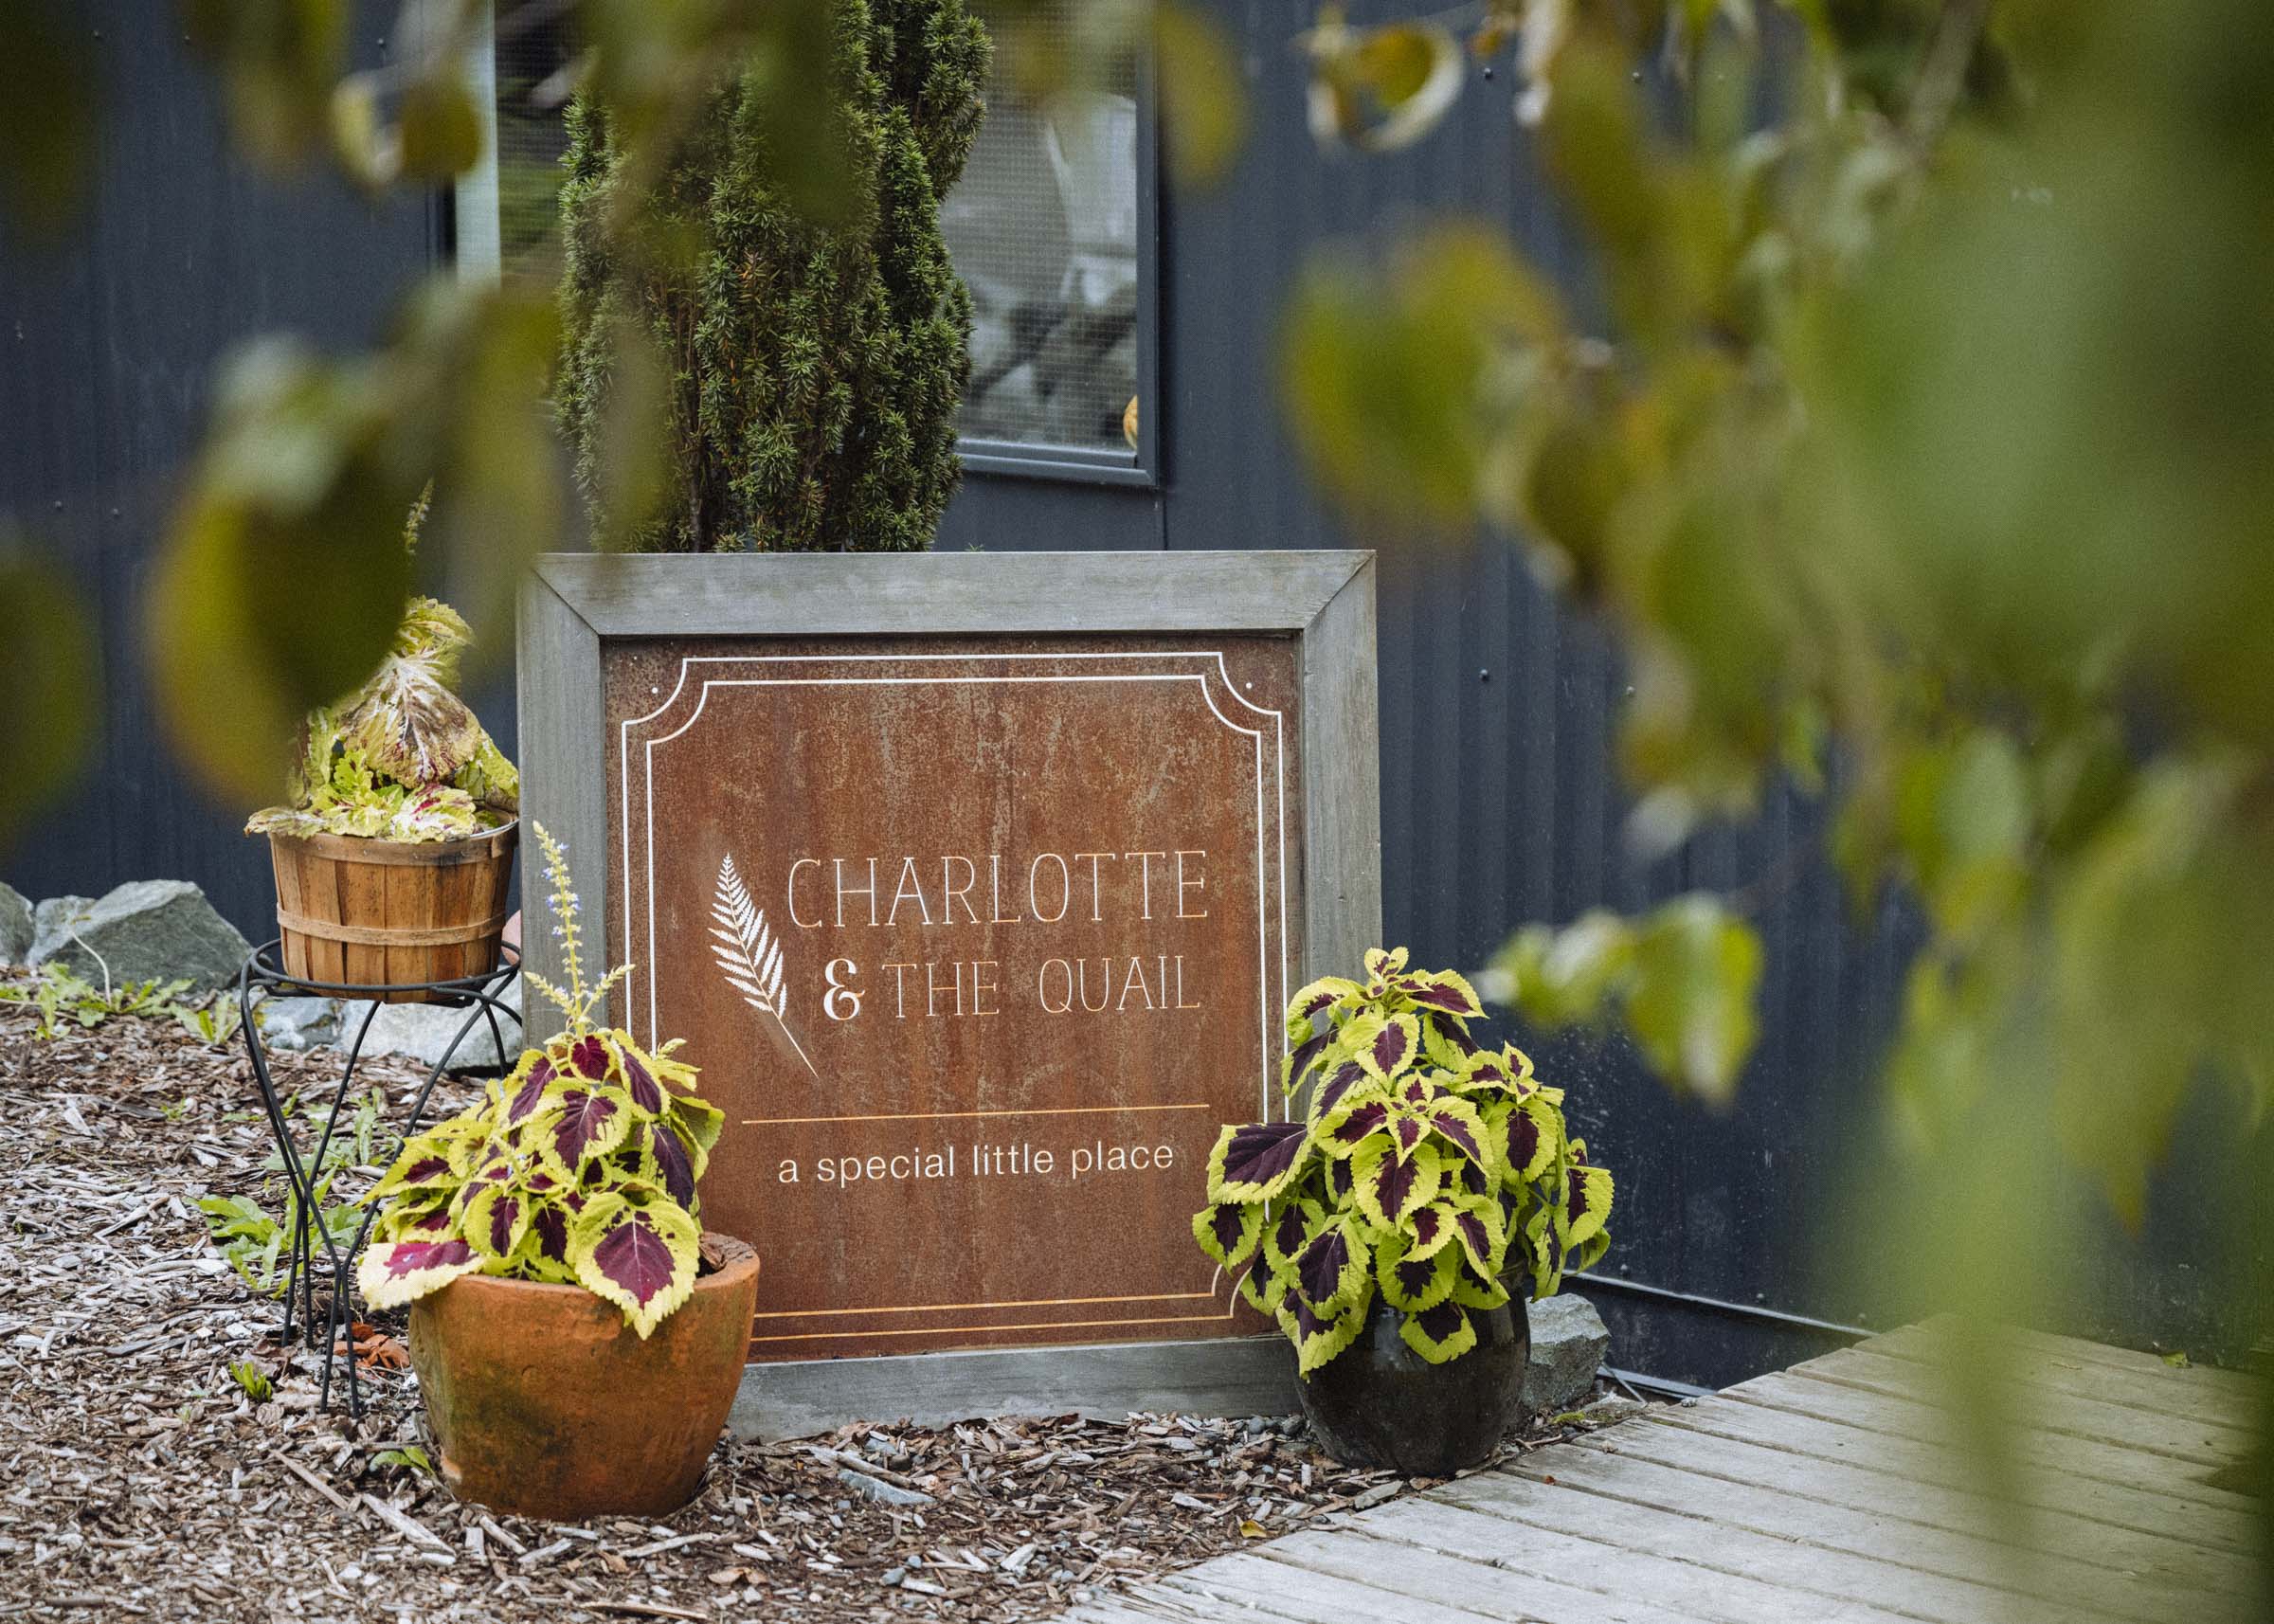 The entrance to Charlotte & the Quail, a cozy little restaurant cafe north of Victoria, BC